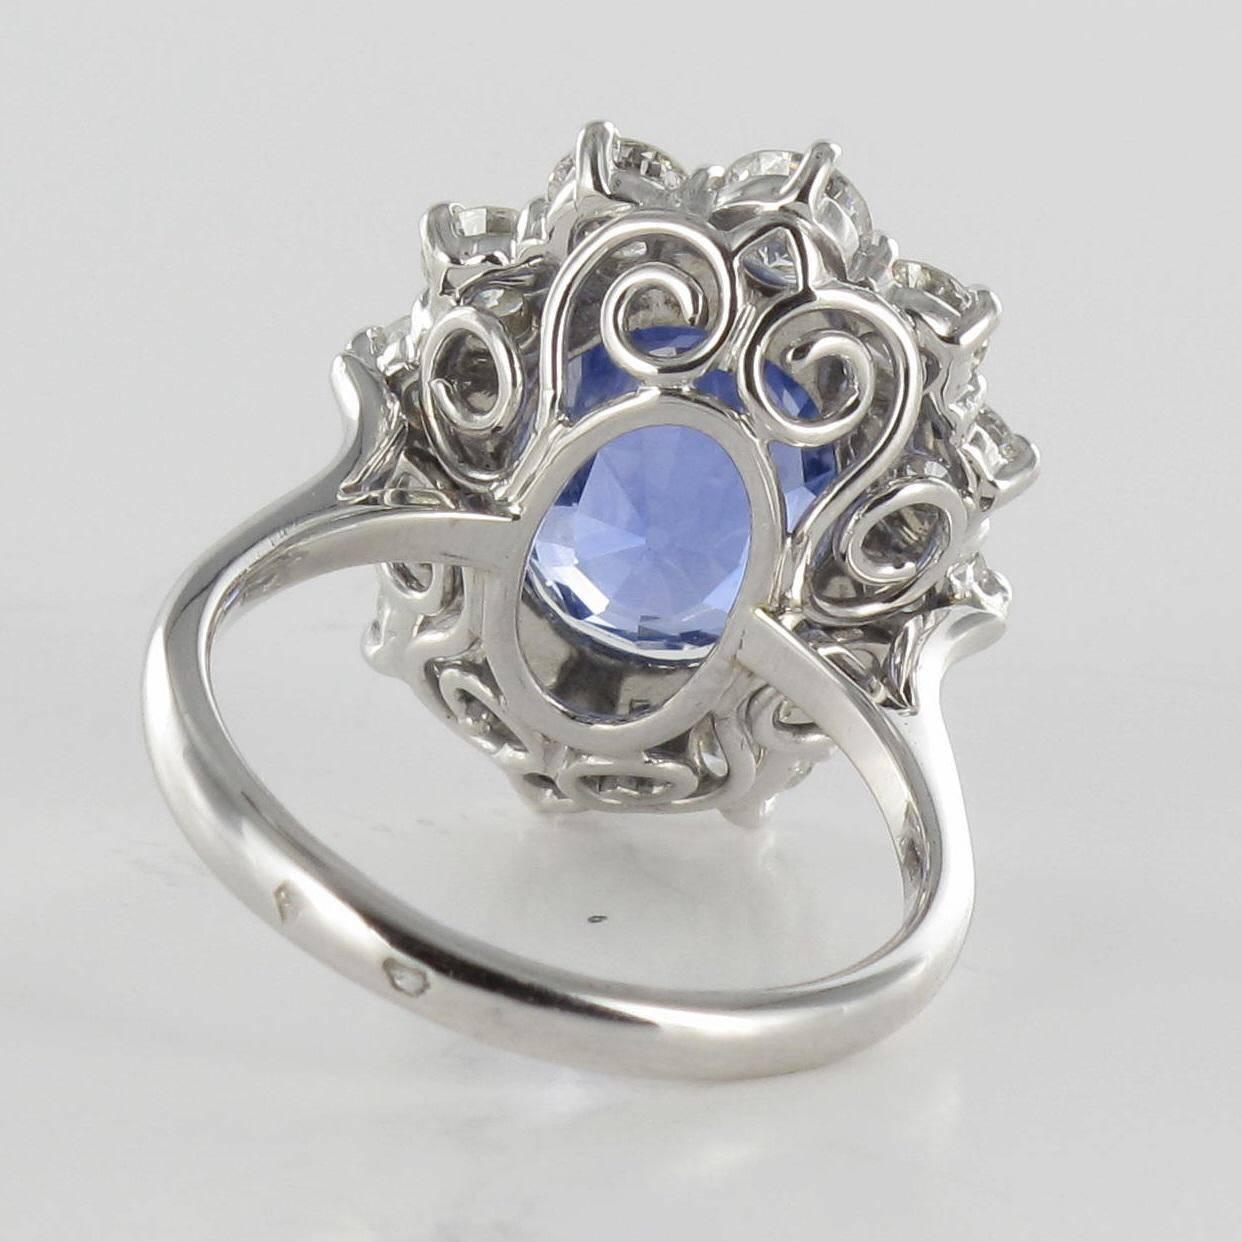 French 1960s No Heat 7.42 Carat Ceylon Sapphire Diamond White Gold Cluster Ring For Sale 9